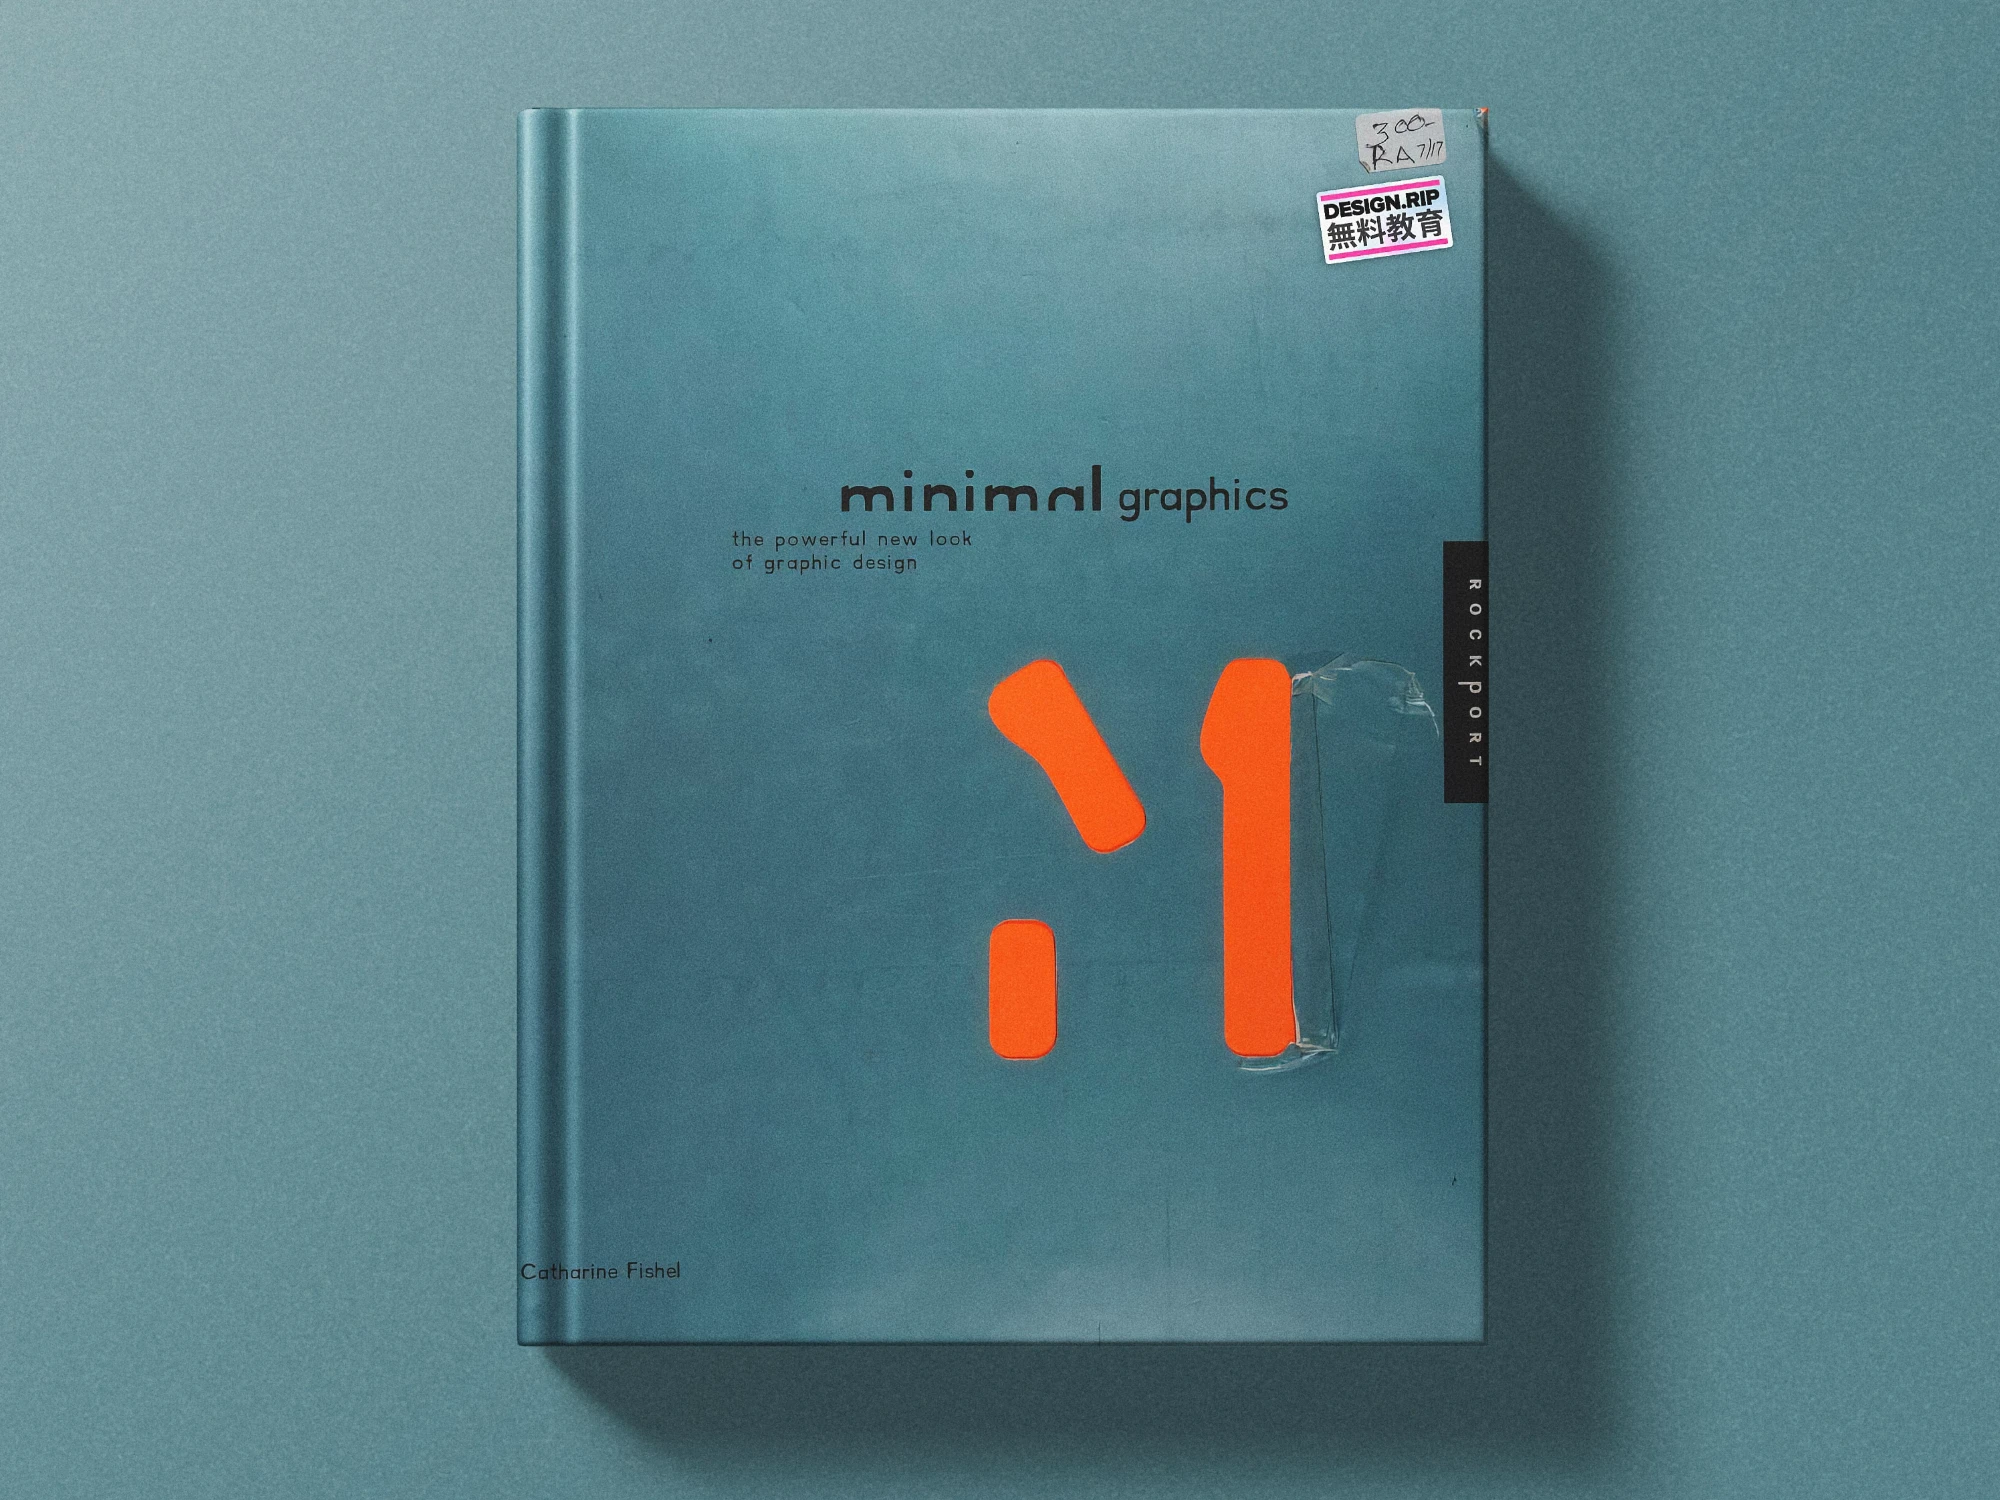 [VIP] Minimal Graphics: The Powerful New Look of Graphic Design